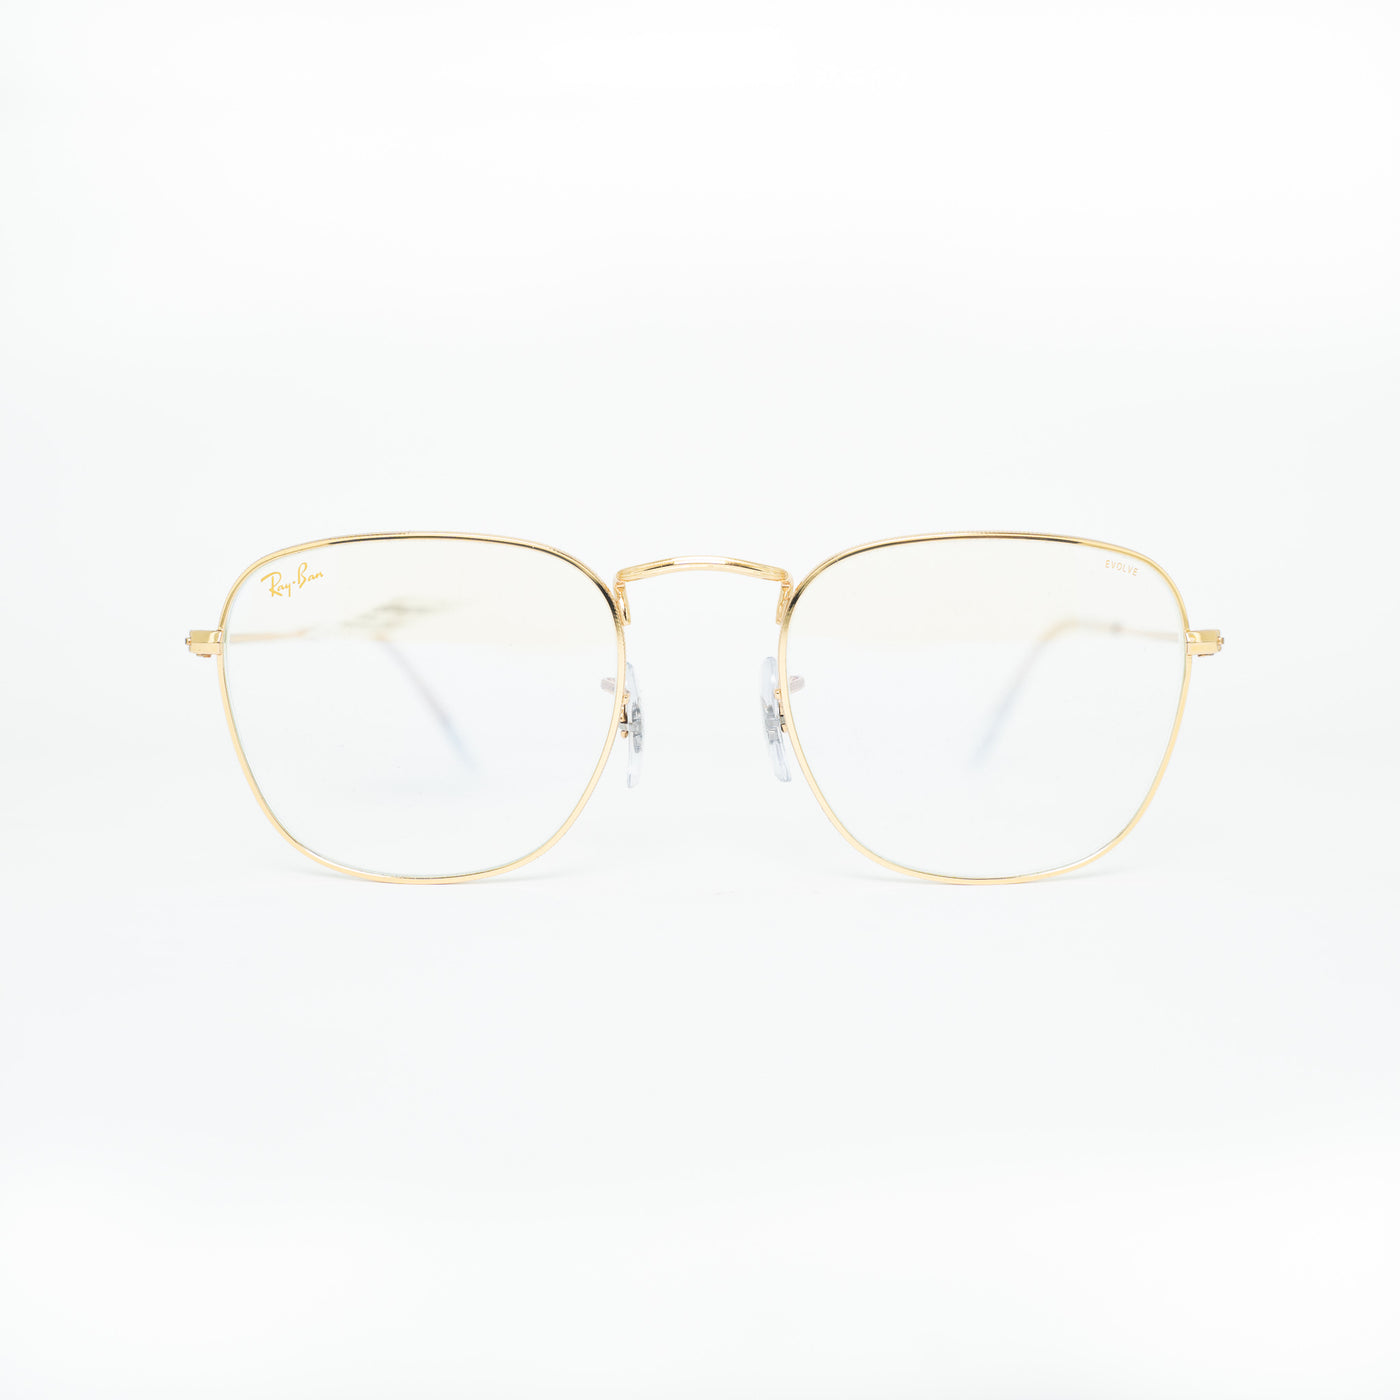 Ray-Ban RB38579196BL51 | Eyeglasses - Vision Express Optical Philippines